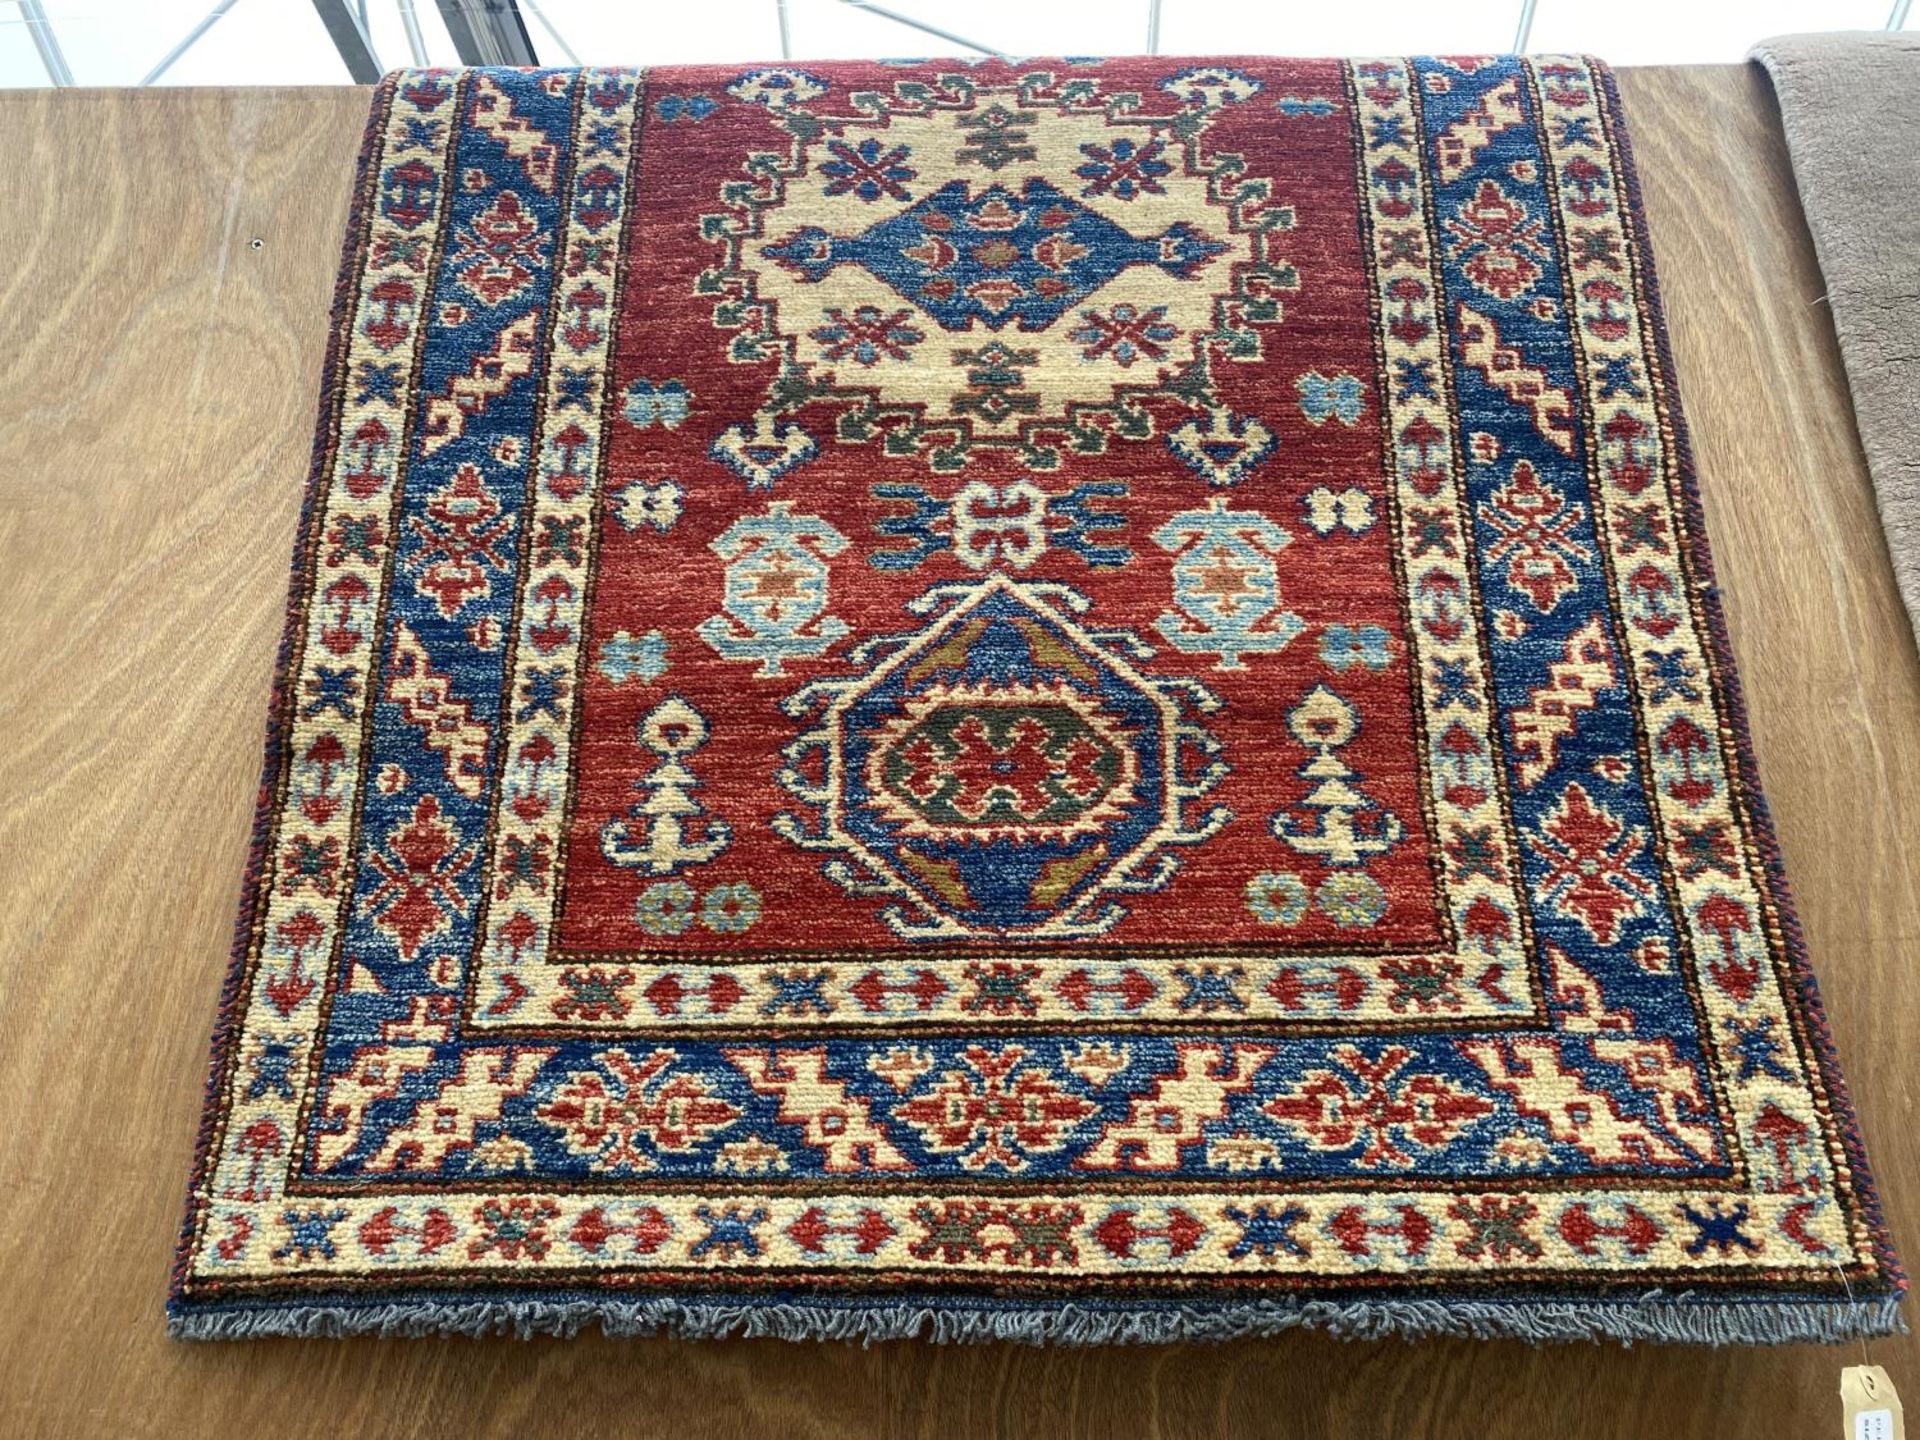 AN AS NEW RED PATTERNED PERSIAN STYLE HANDKNOTTED RUG BEARING THE LABEL OF PERSIAN RUGS DIRECT